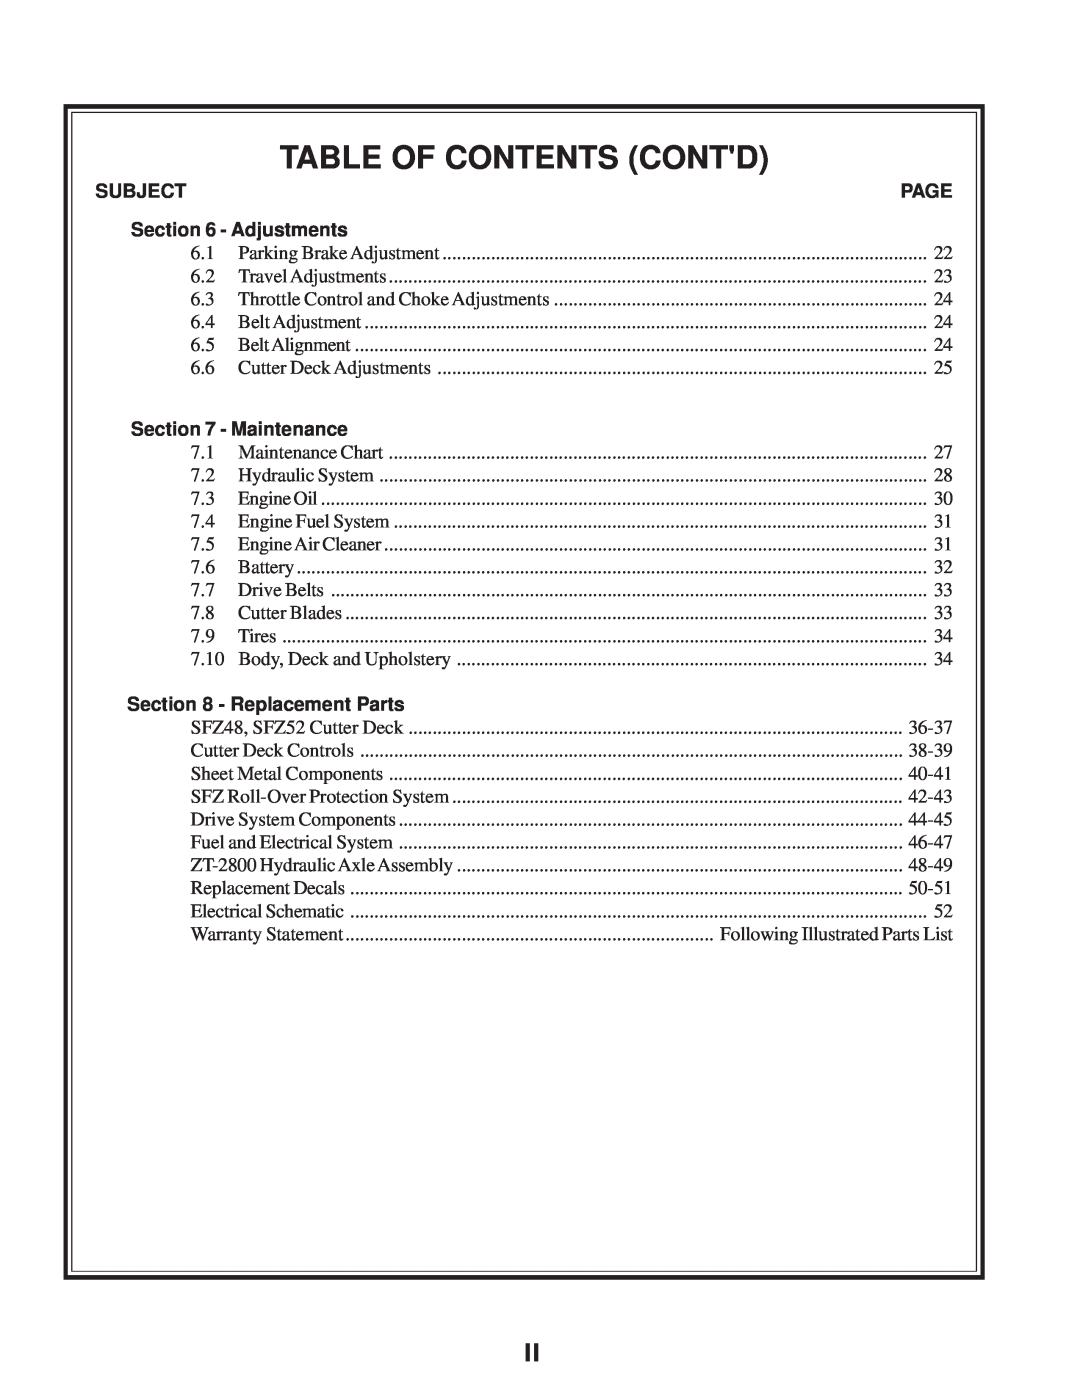 Scag Power Equipment SFZ manual Table Of Contents Contd, Subject, Page, Adjustments, Maintenance, Replacement Parts 